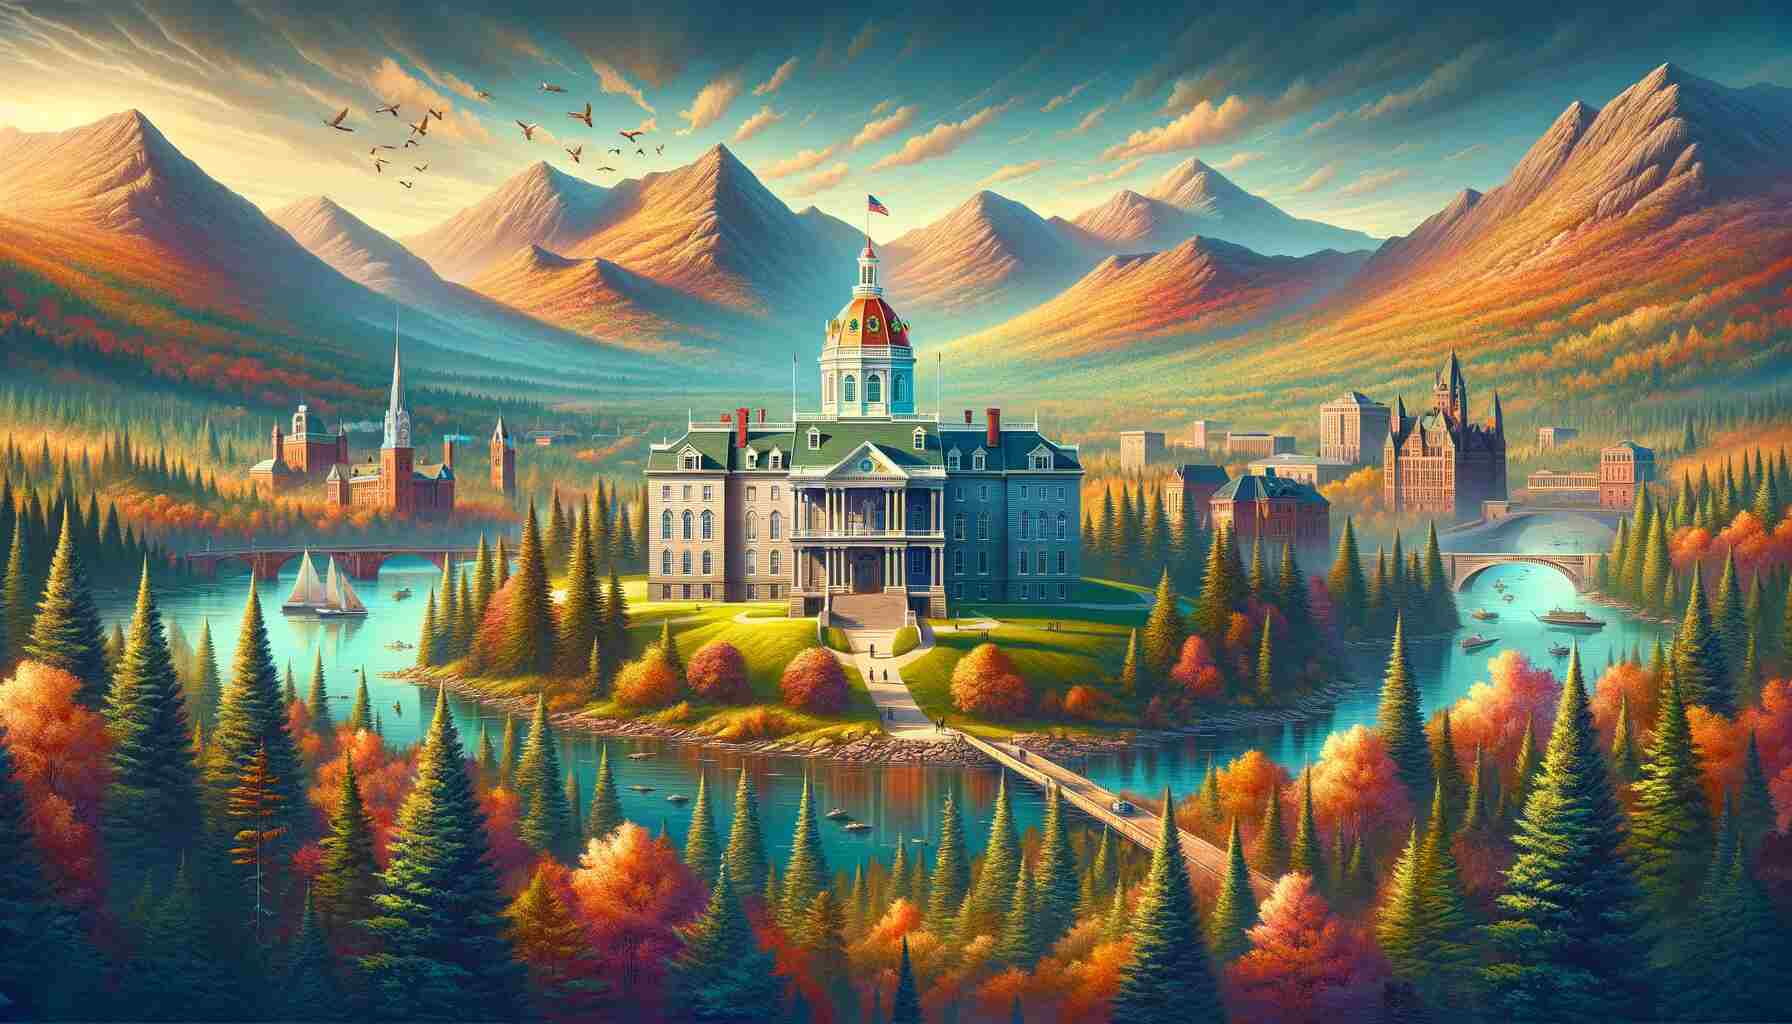 Here is the featured image for "Political Landmarks and Natural Wonders: A Travel Guide for New Hampshire". This image combines the scenic beauty of New Hampshire's natural landscapes with its iconic political landmarks, set in a vibrant autumn setting. It's designed to be suitable for a travel guide cover, balancing nature and architecture.